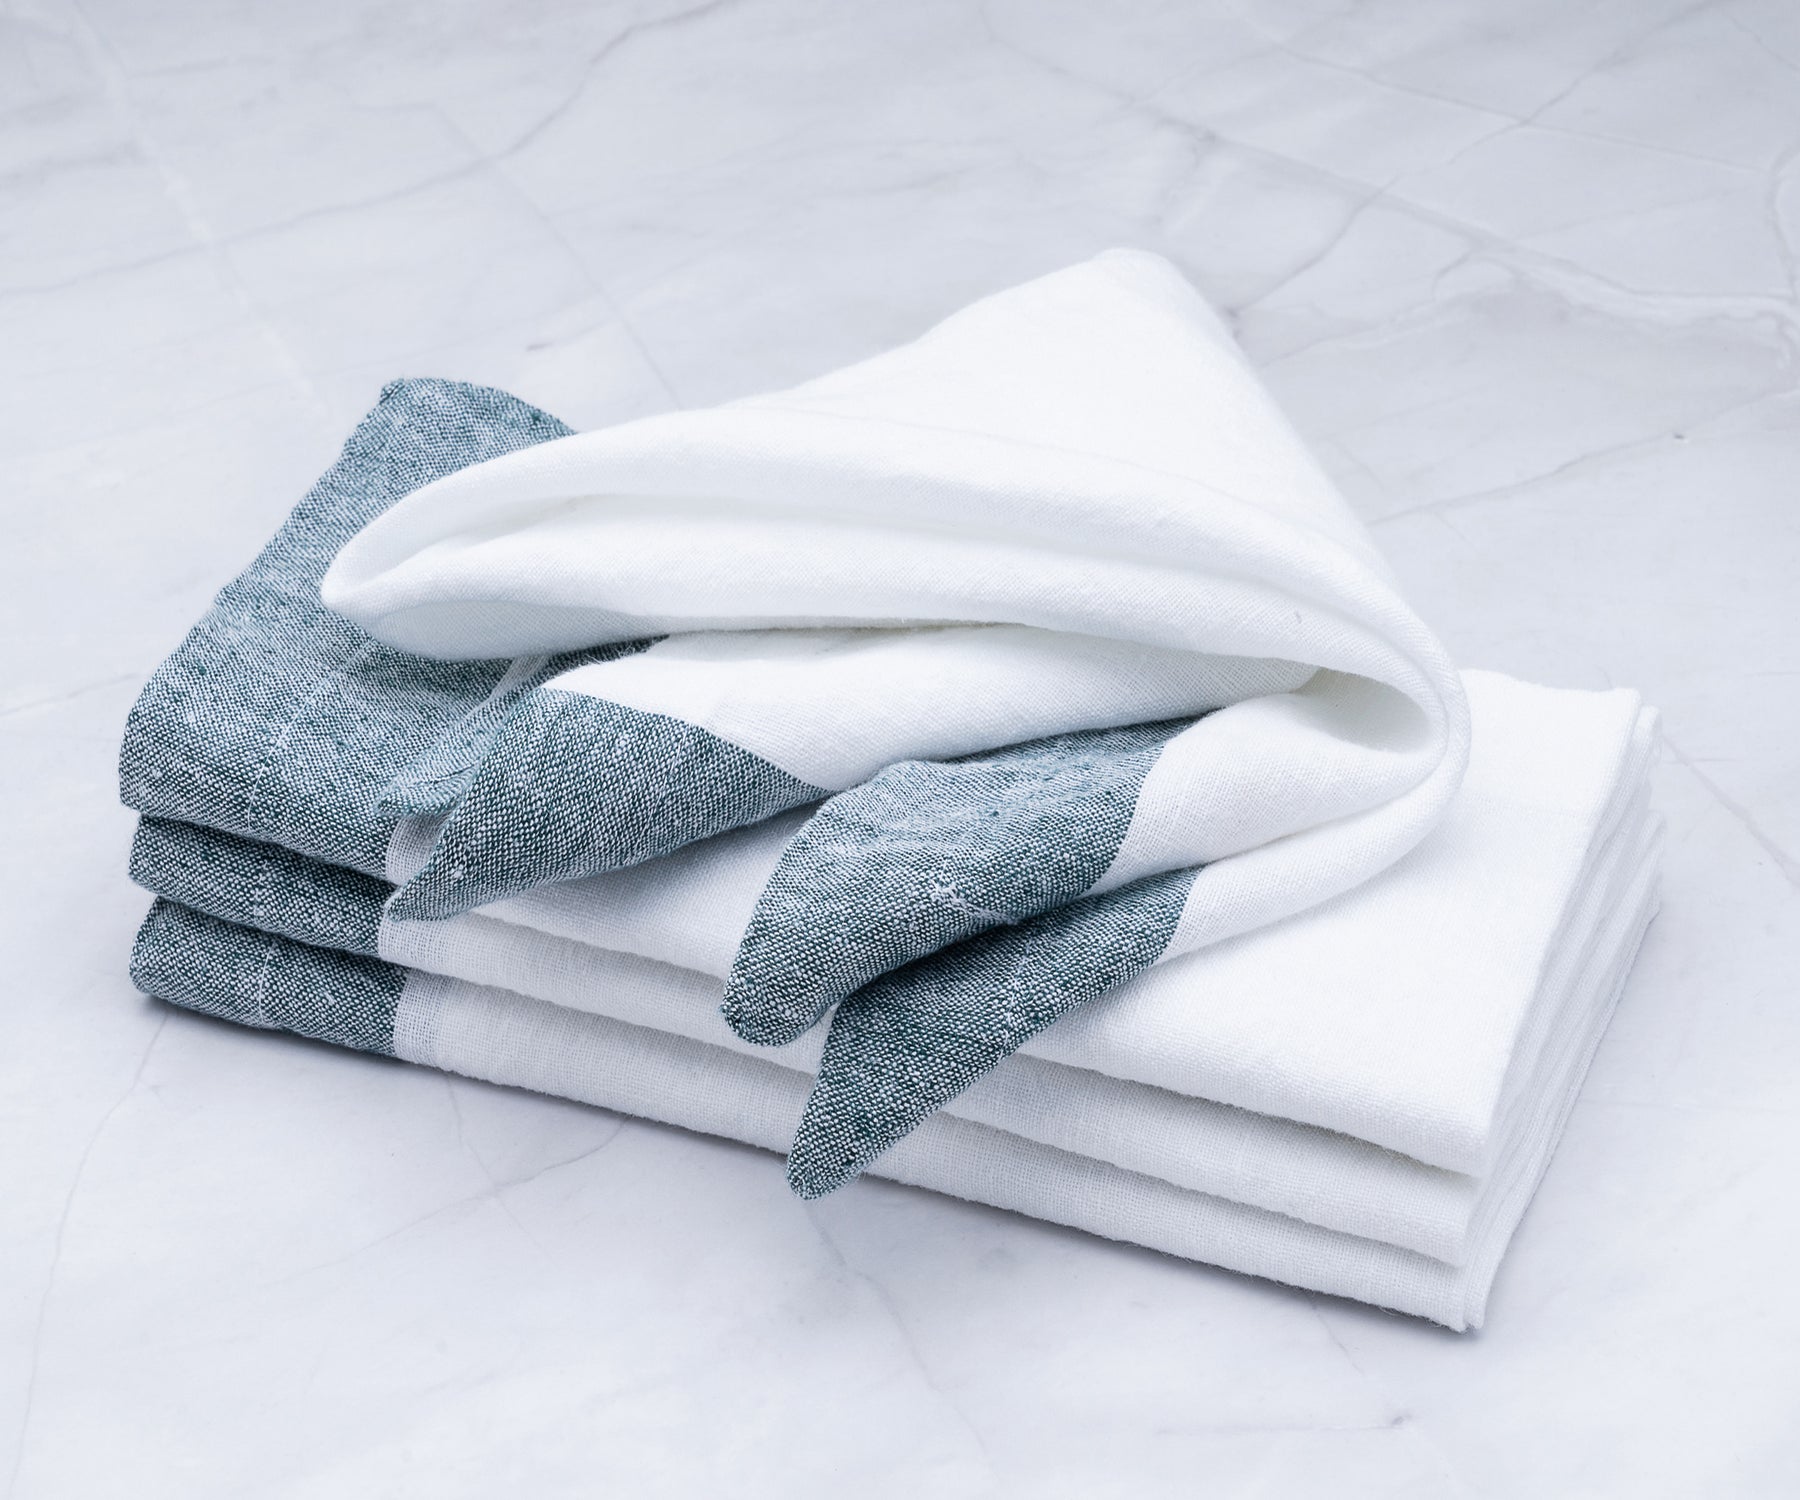 I have a set of gray napkins, perfect for dinner. These cloth napkins are made of linen, and I also have white linen napkins available.Explore creative linen napkin folds to elevate the presentation of your table setting.